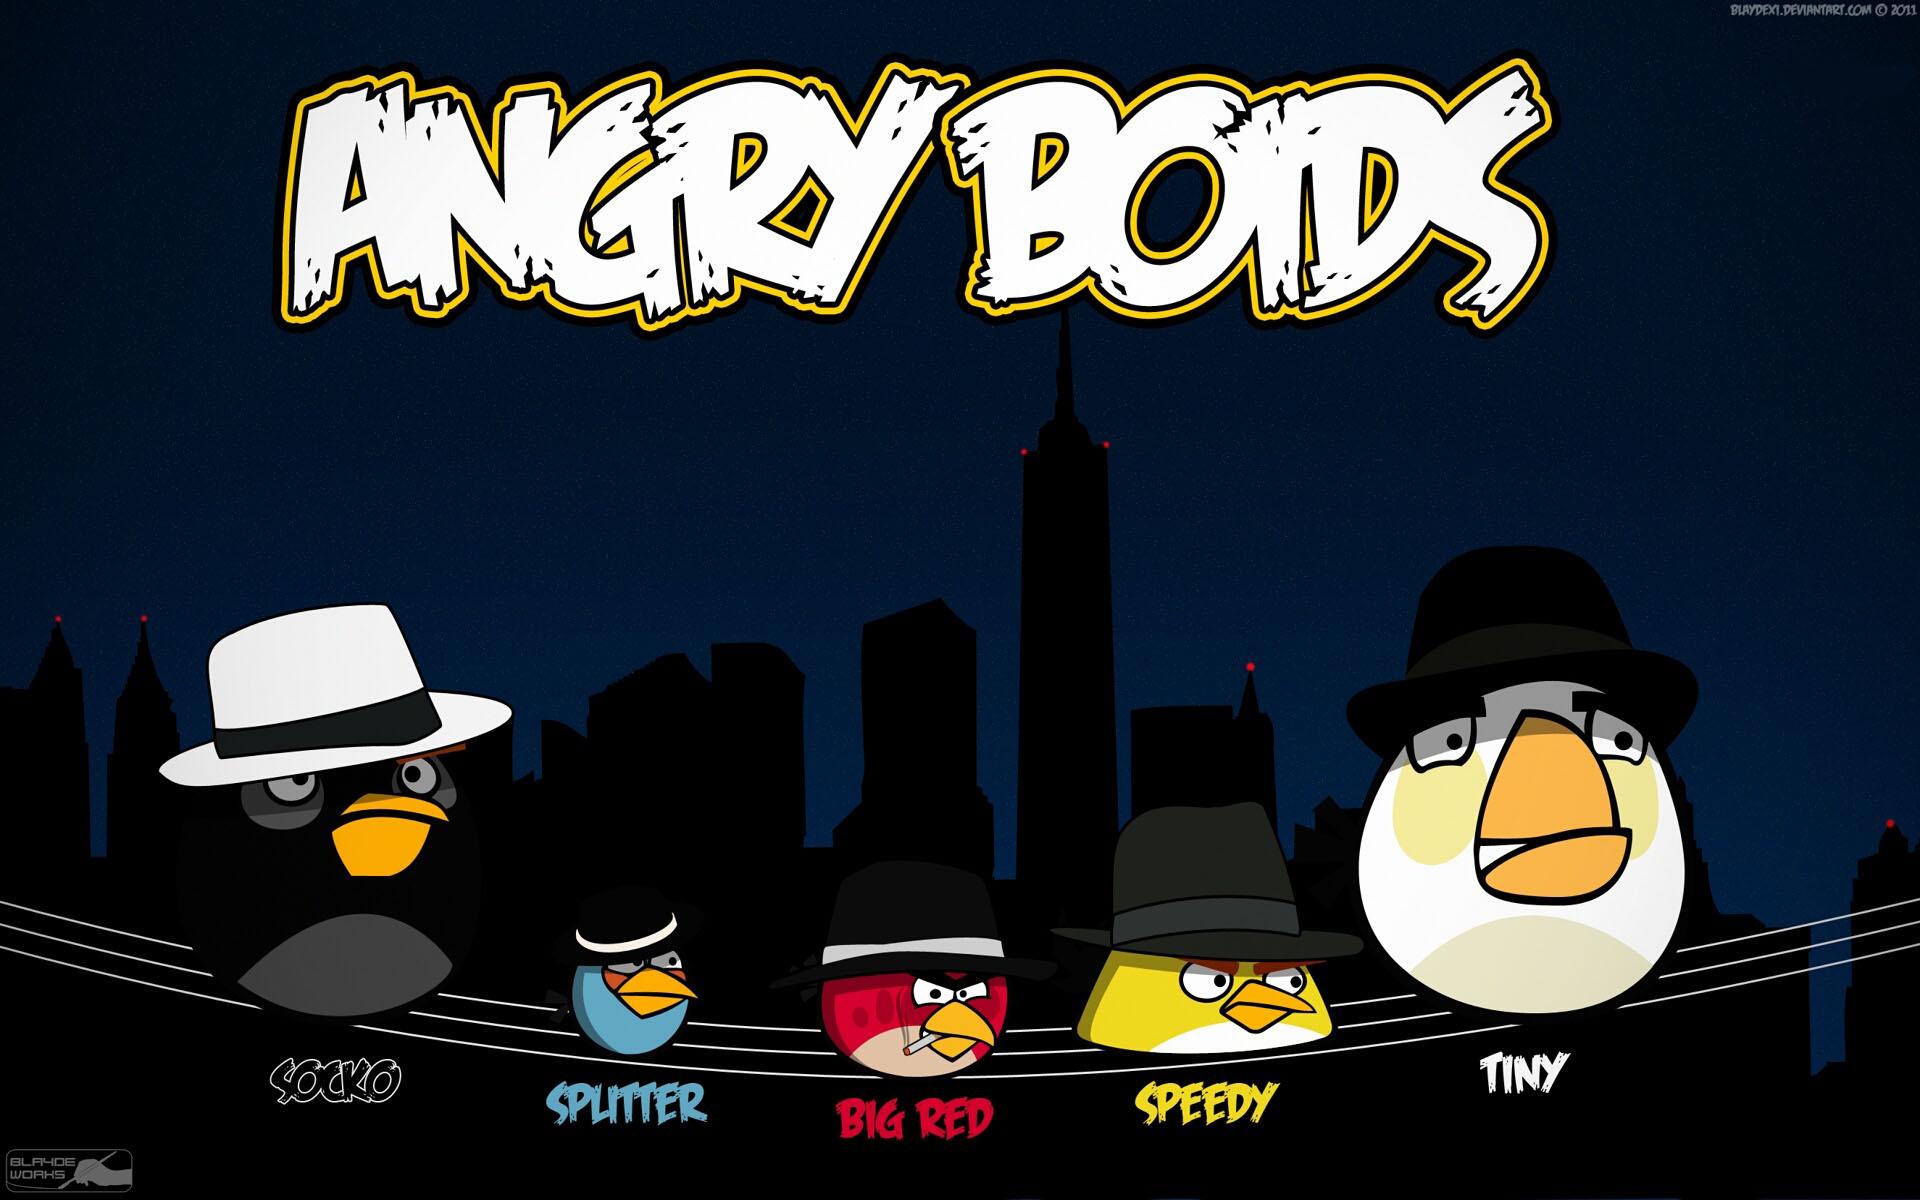 3 angry birds wallpaper hd :: Angry Birds Hd Wallpapers